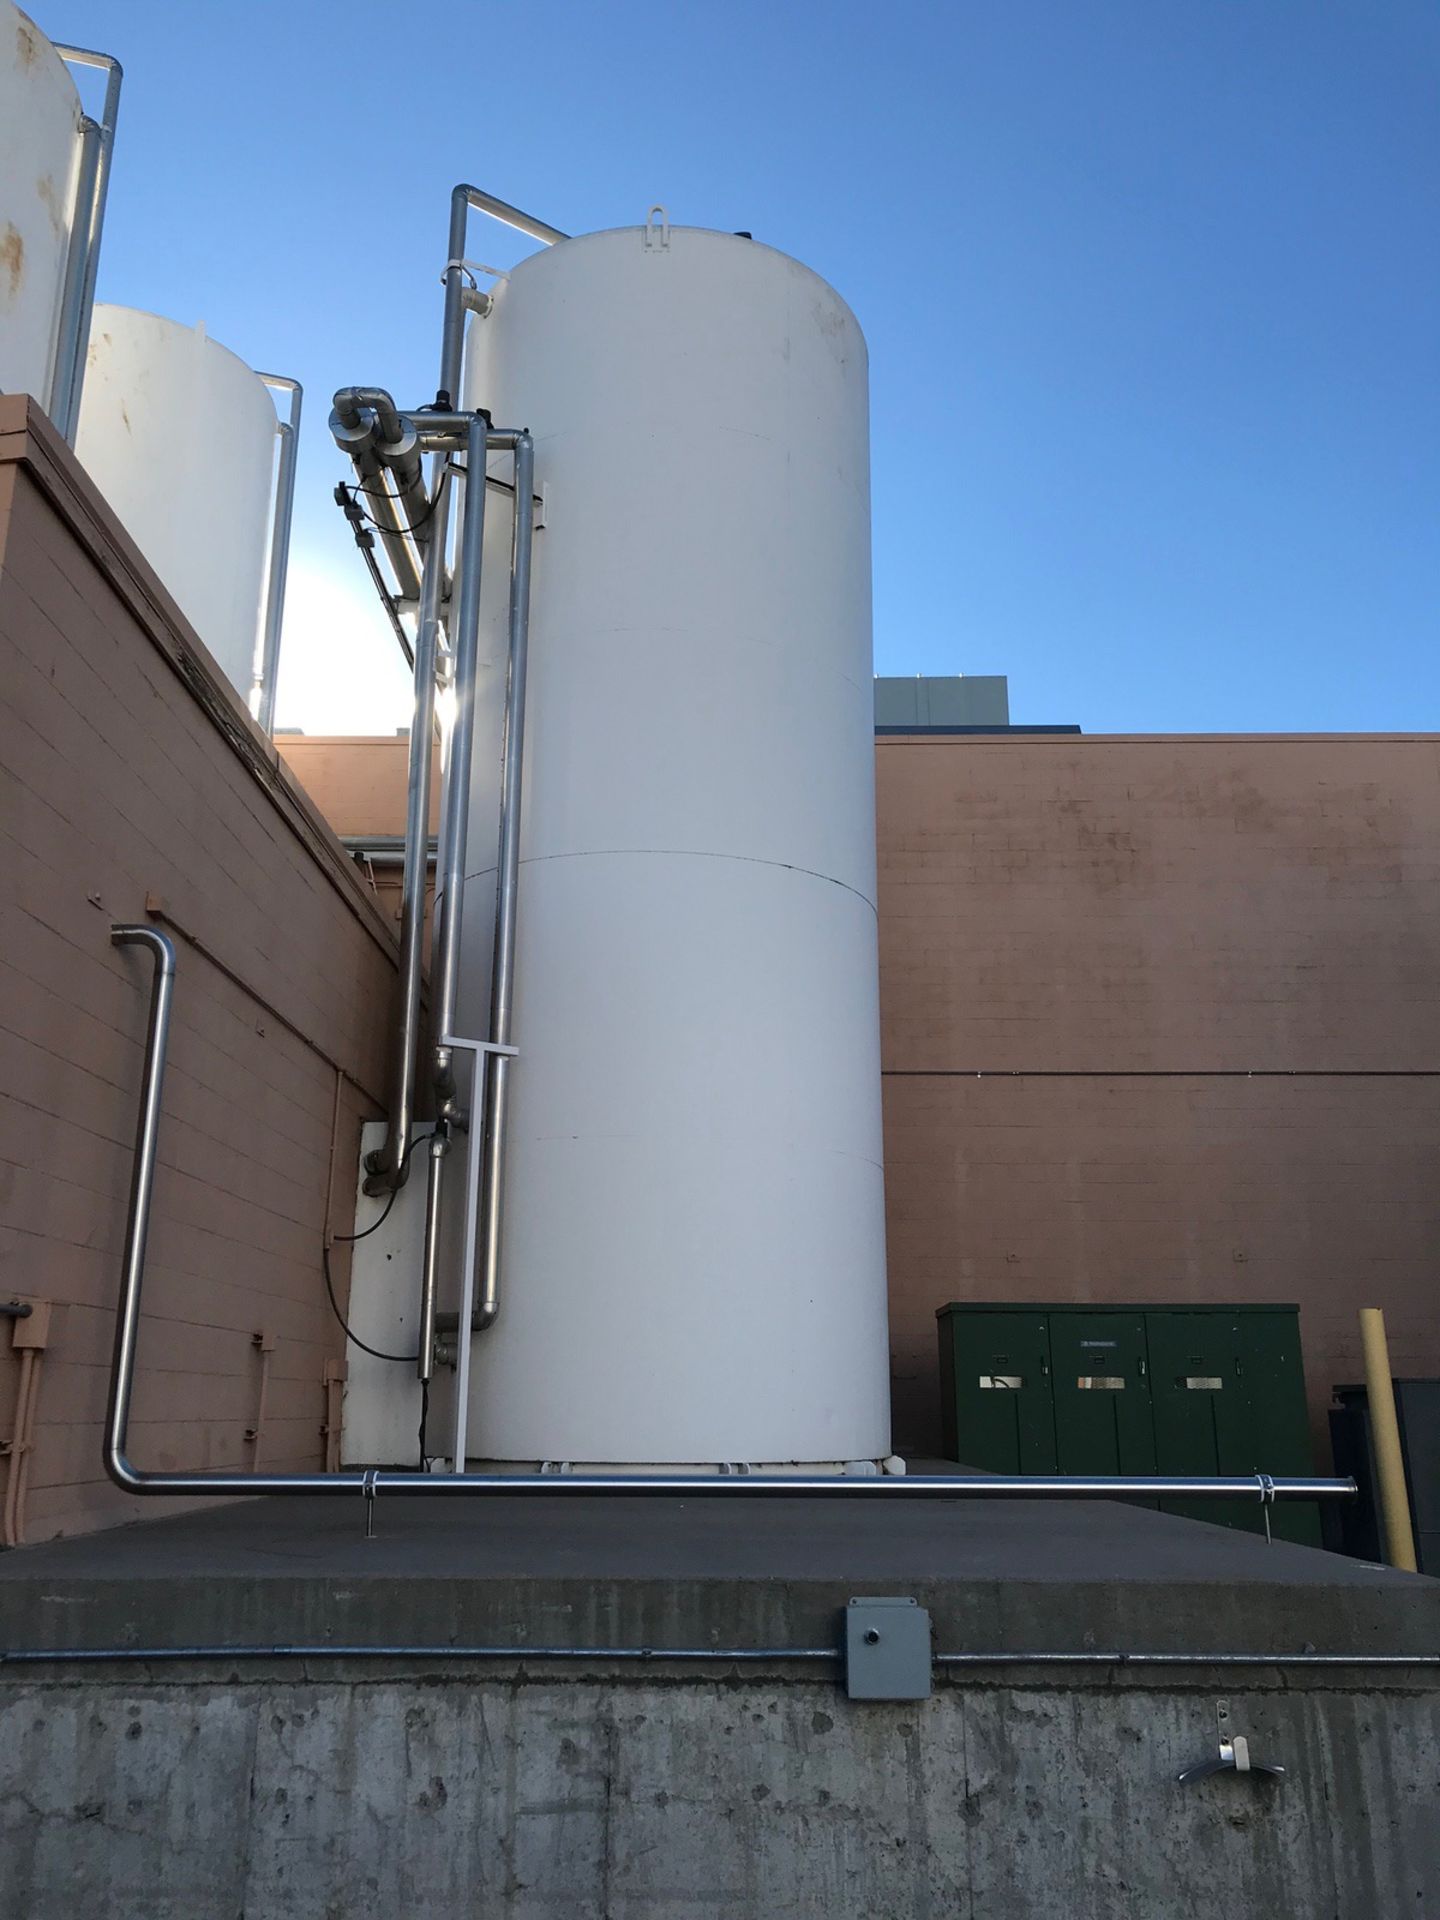 DAIRY CRAFT 15,000 GALLON SILO, GLYCOL JACKETED, HORIZONTAL AGITATION, VERTICAL AGIT | Rig Fee $5500 - Image 3 of 3